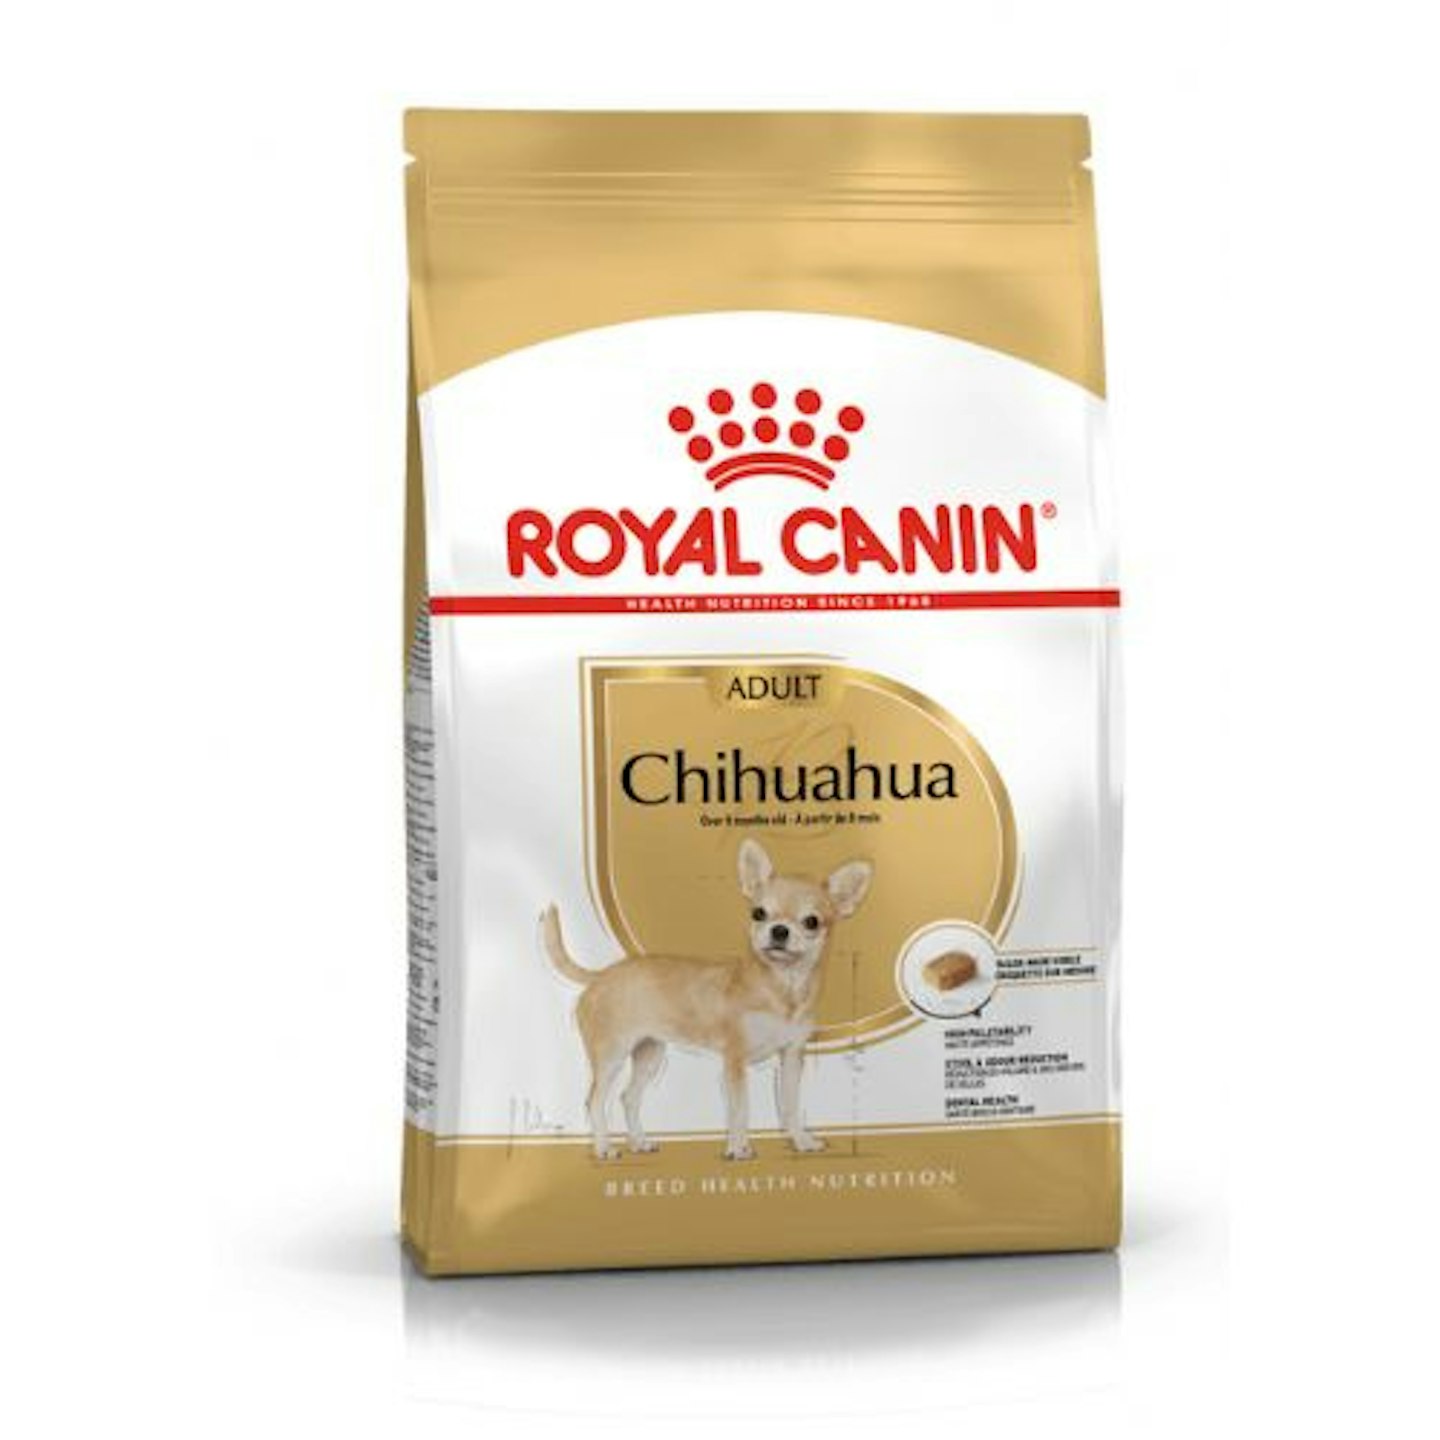 Royal Canin Chihuahua Adult Breed Dry Dog Food 1.5kg